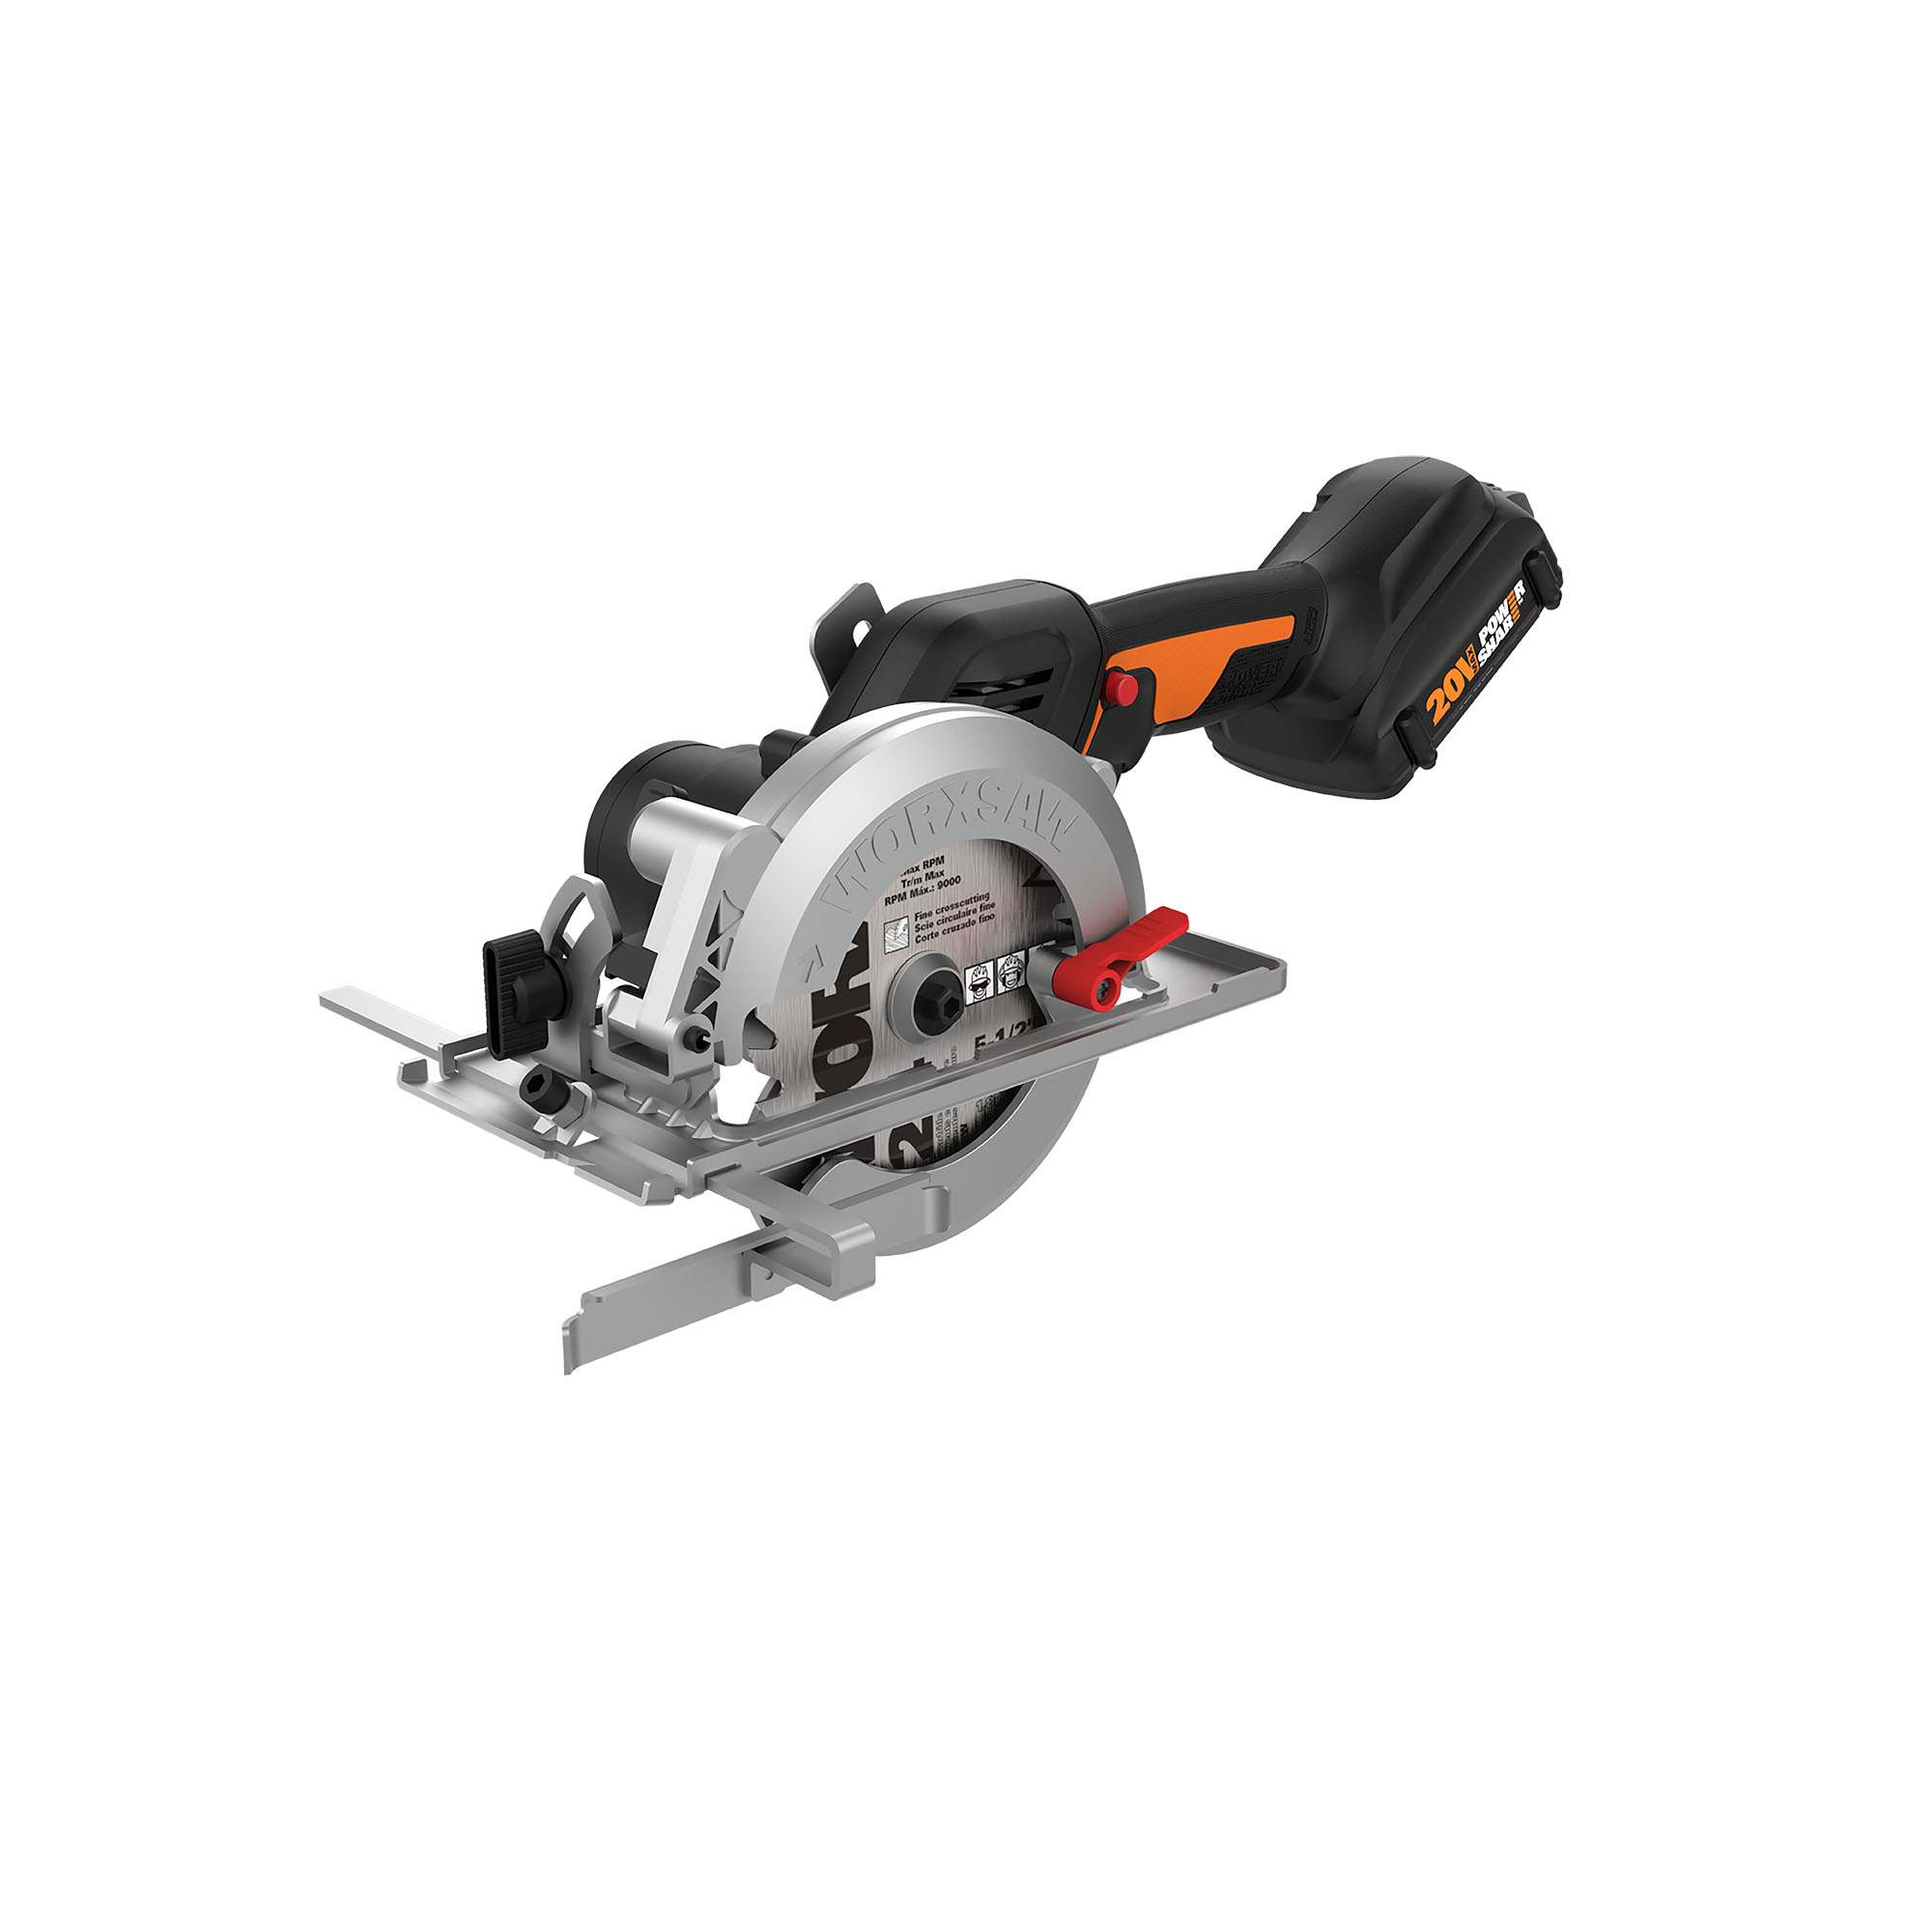 WORX 20V Power Share 4-1/2 in. WORXSAW Compact Circular Saw with brushless motor